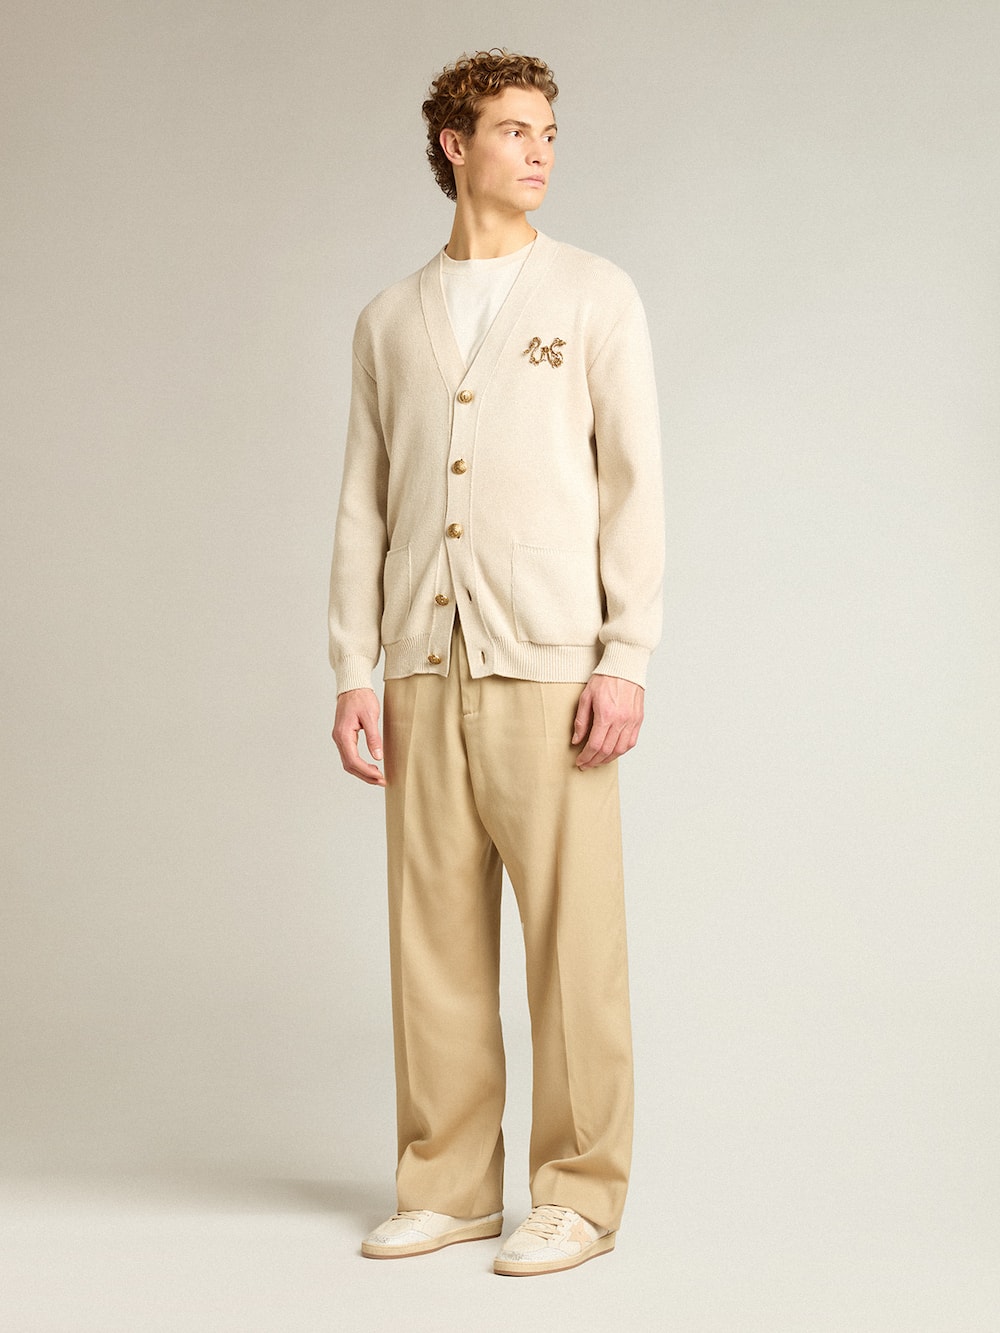 Golden Goose - Cardigan in aged white cotton with gold button fastening in 